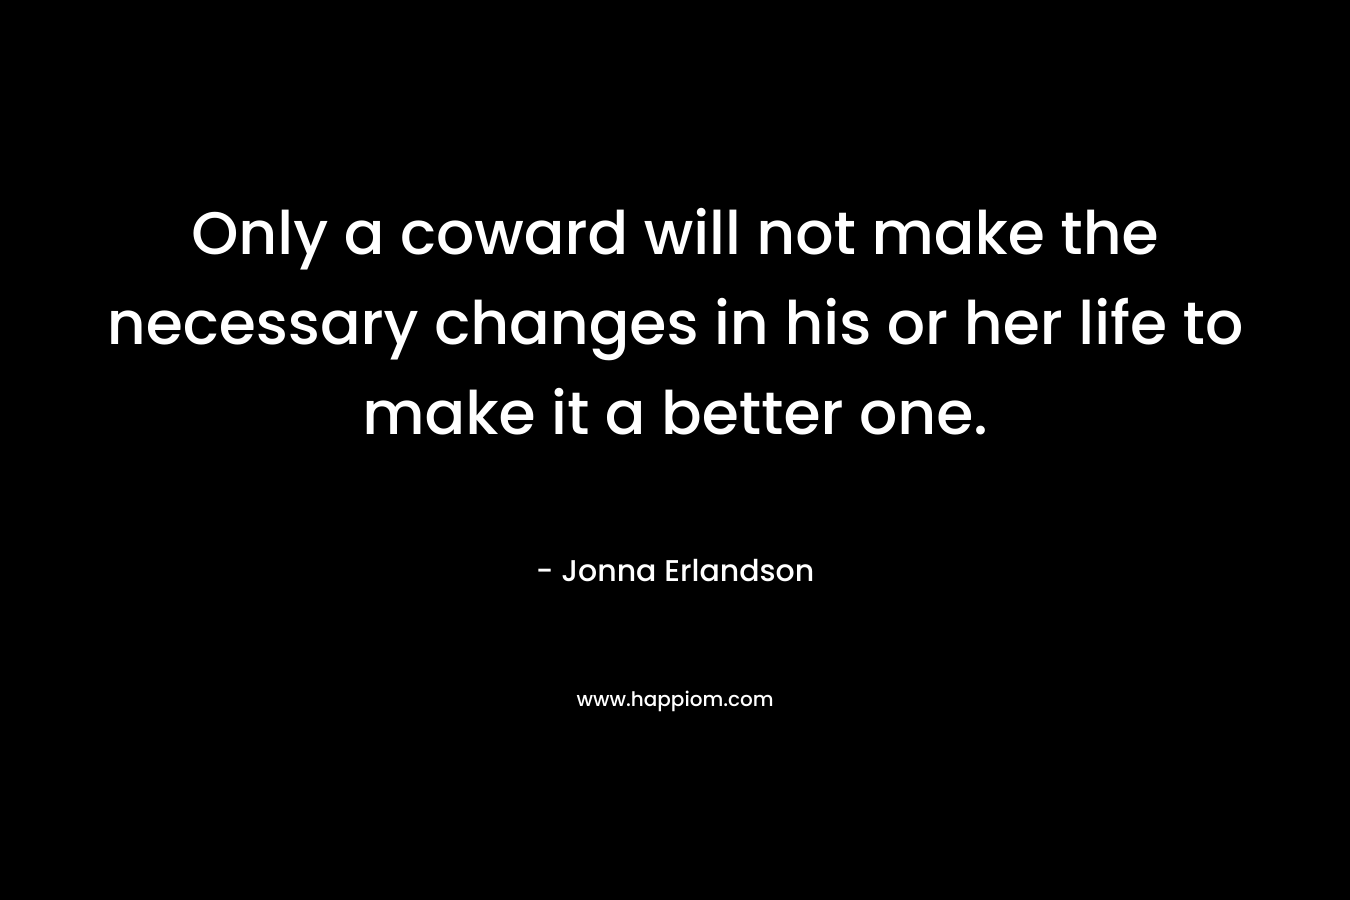 Only a coward will not make the necessary changes in his or her life to make it a better one.